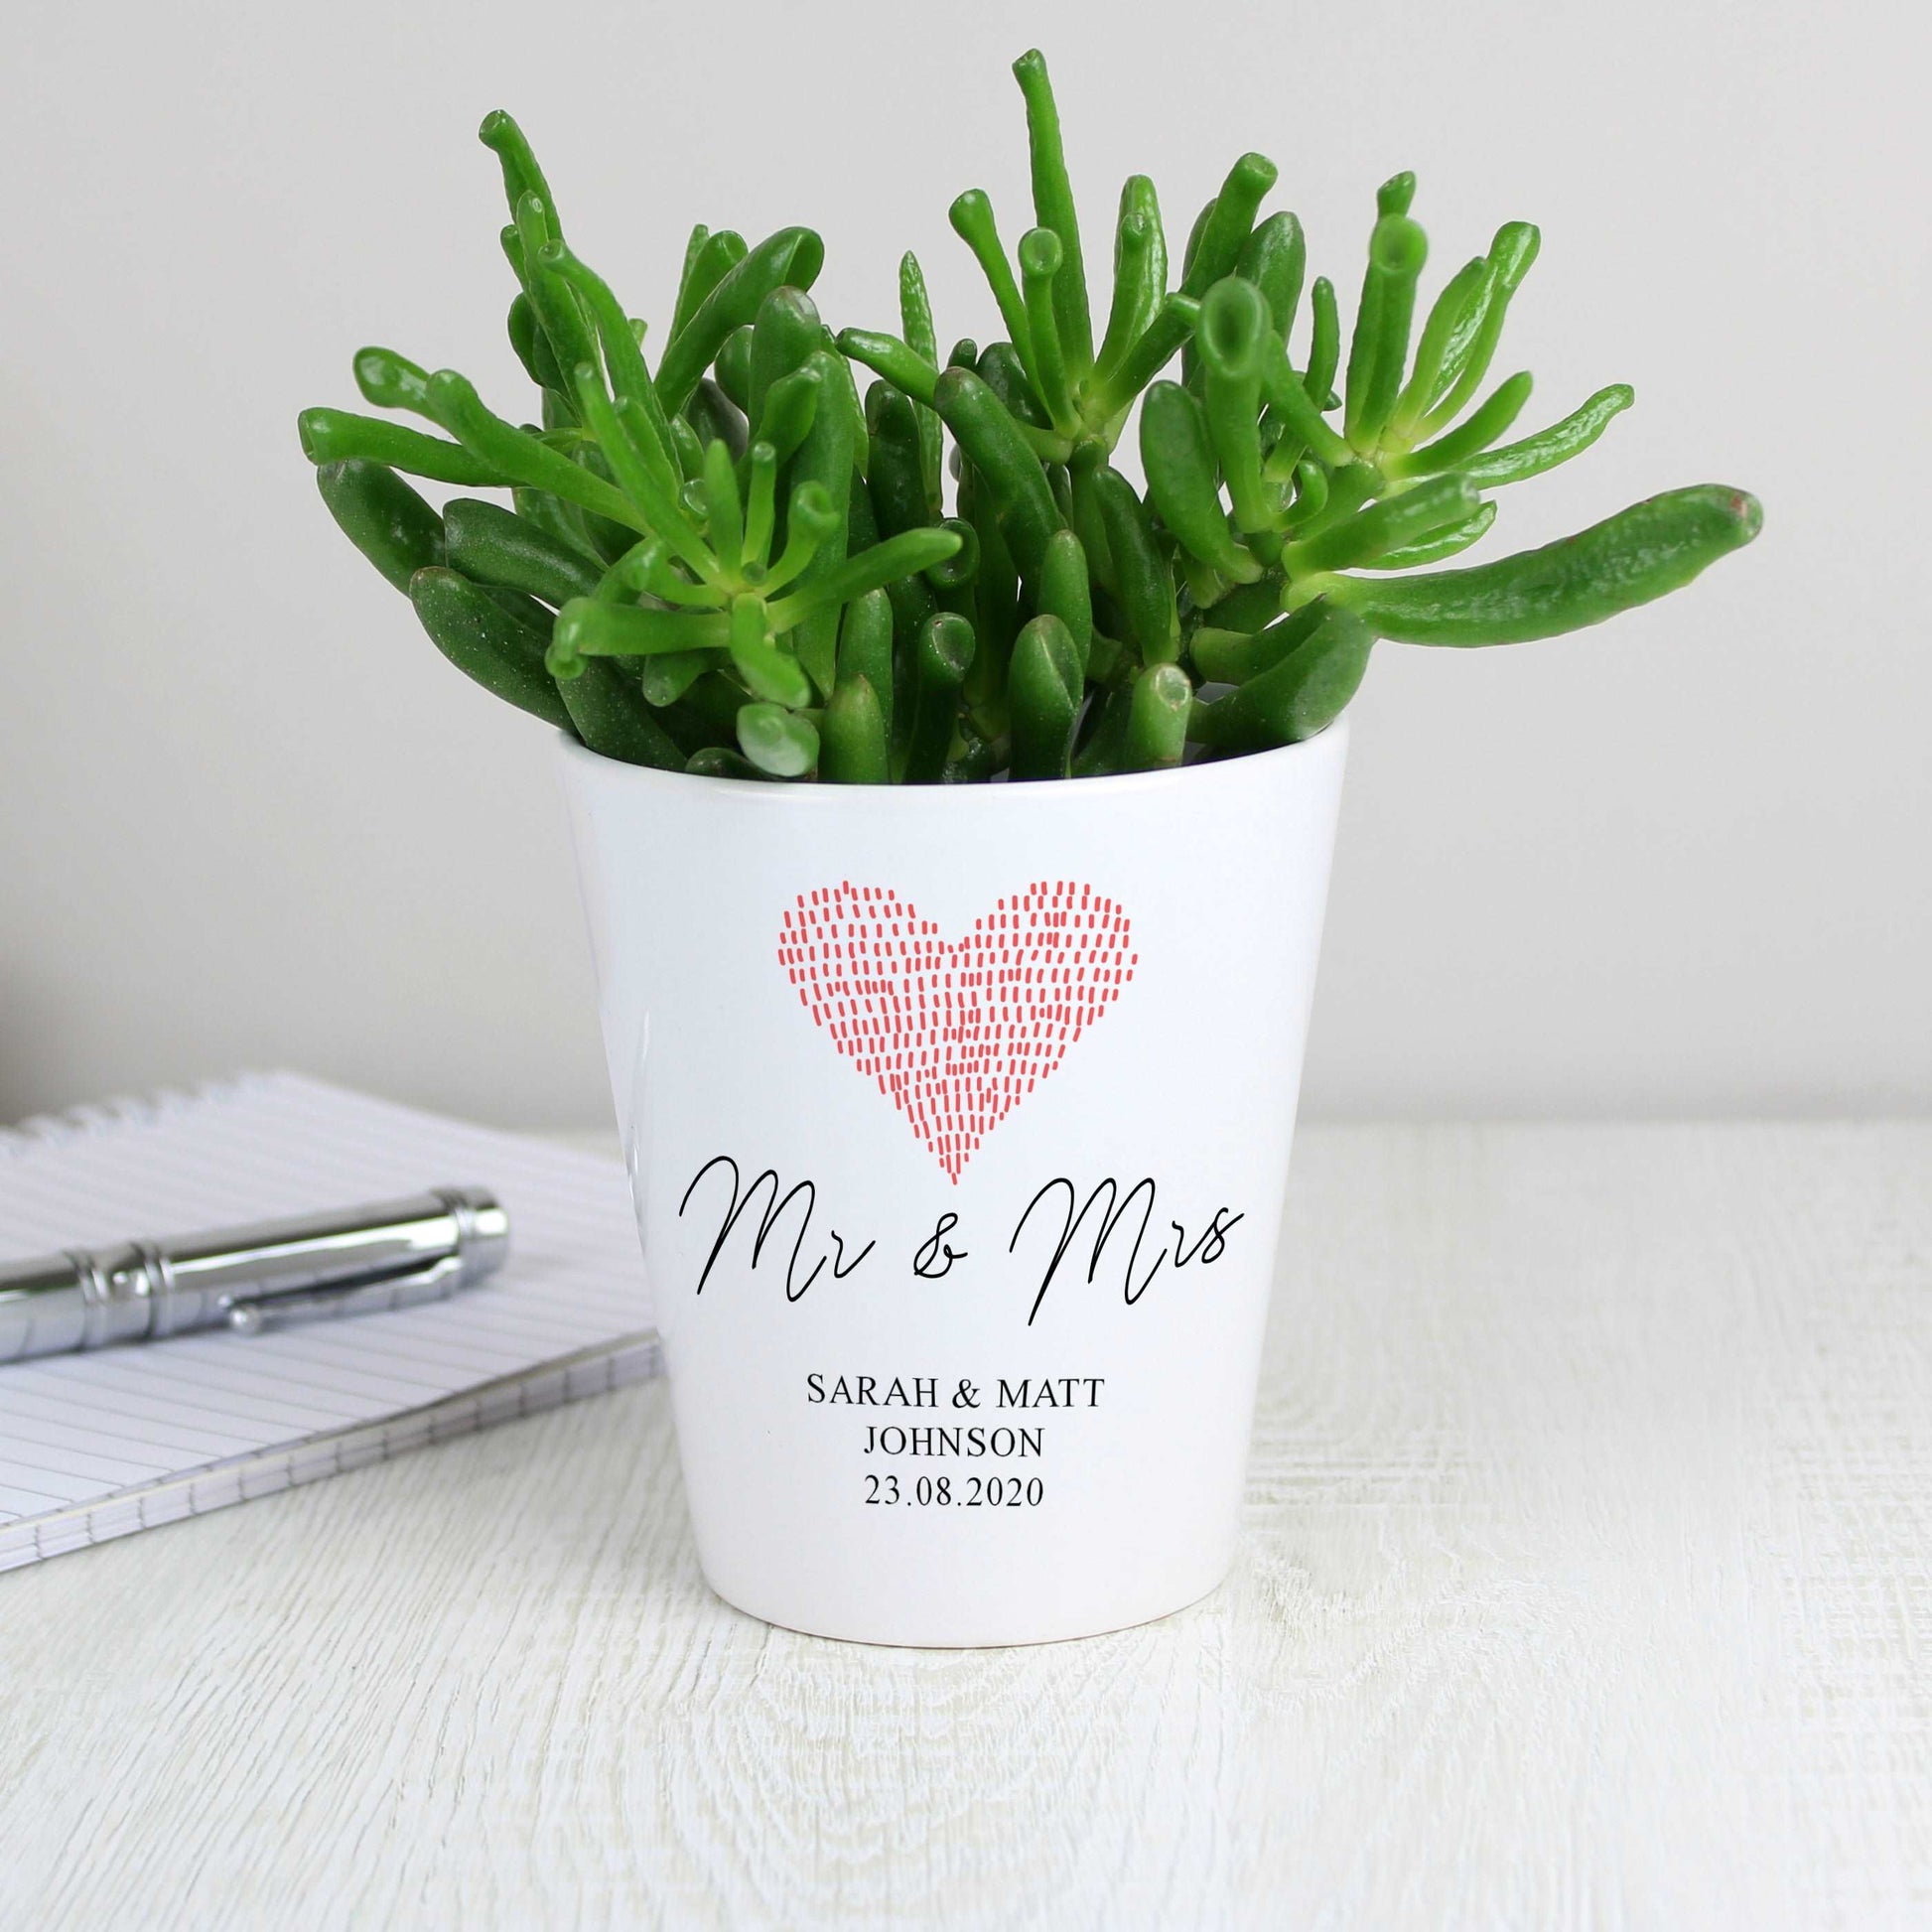 Personalised ceramic plant pot with Heart design